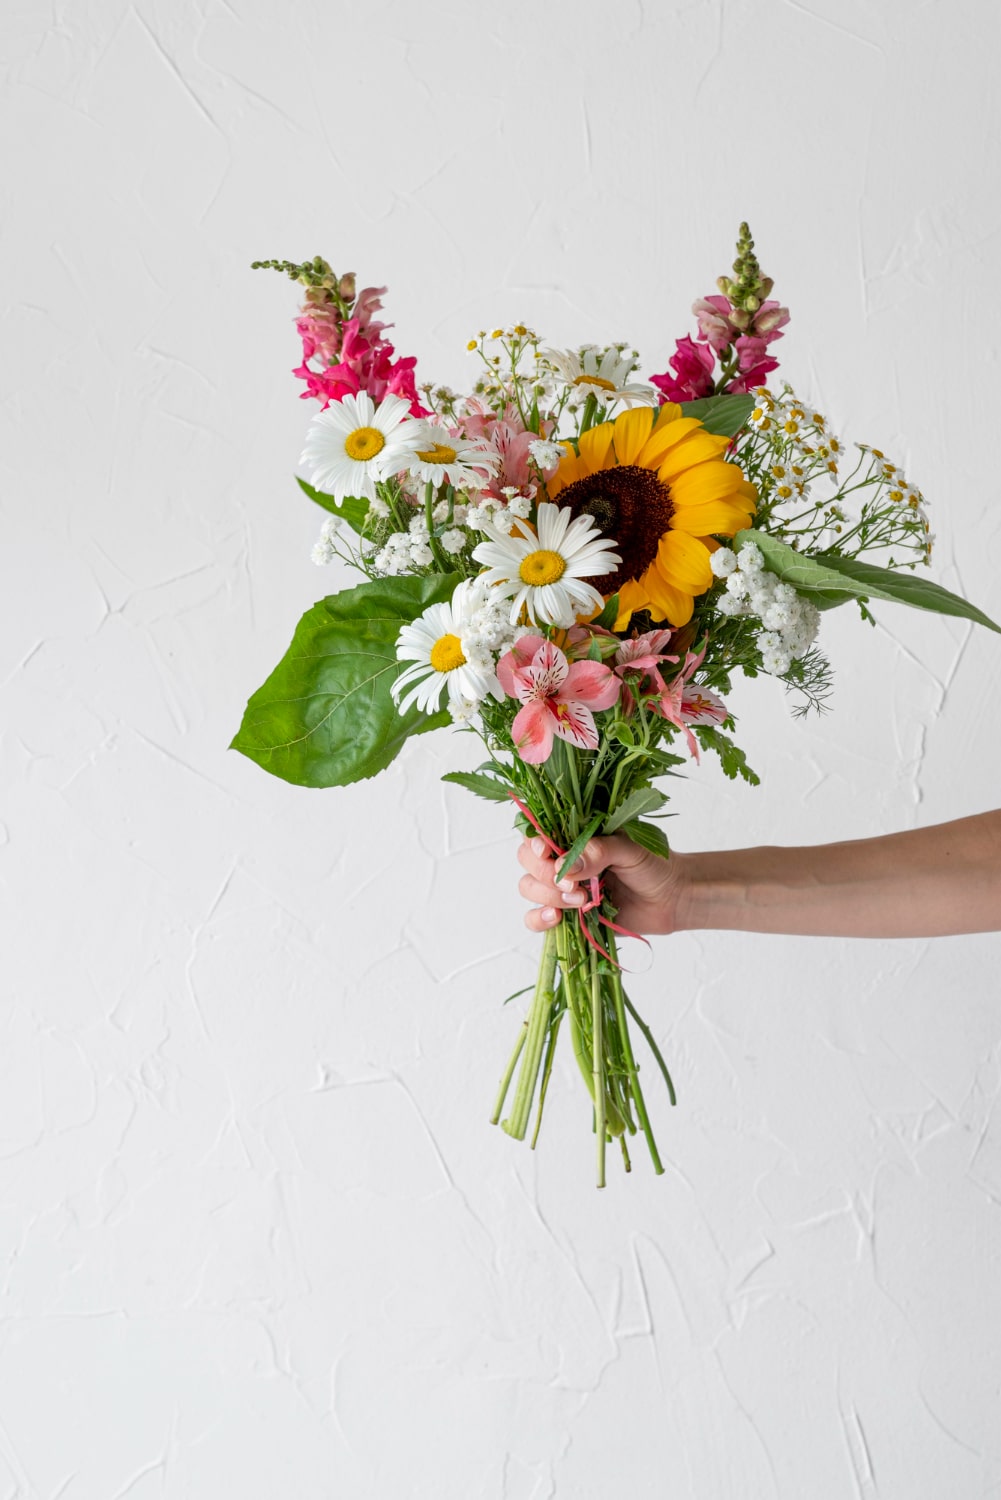 A Husband’s Guide to Buying the Perfect Valentine’s Day Flowers